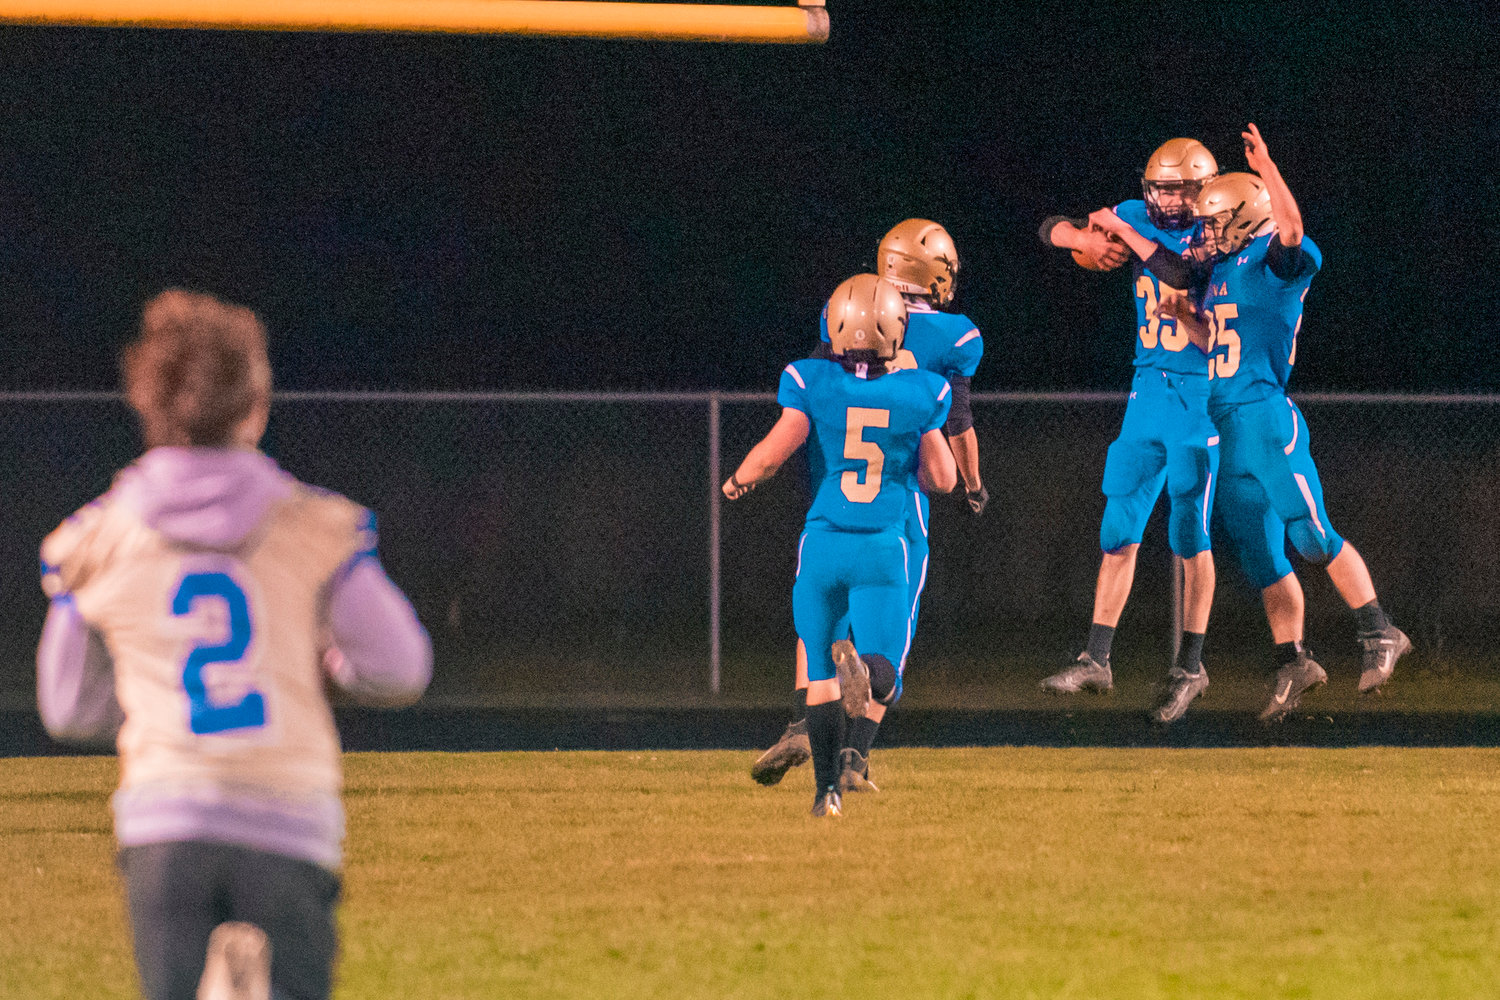 Pirates celebrate a touchdown during a game against PWV in Adna on Wednesday.